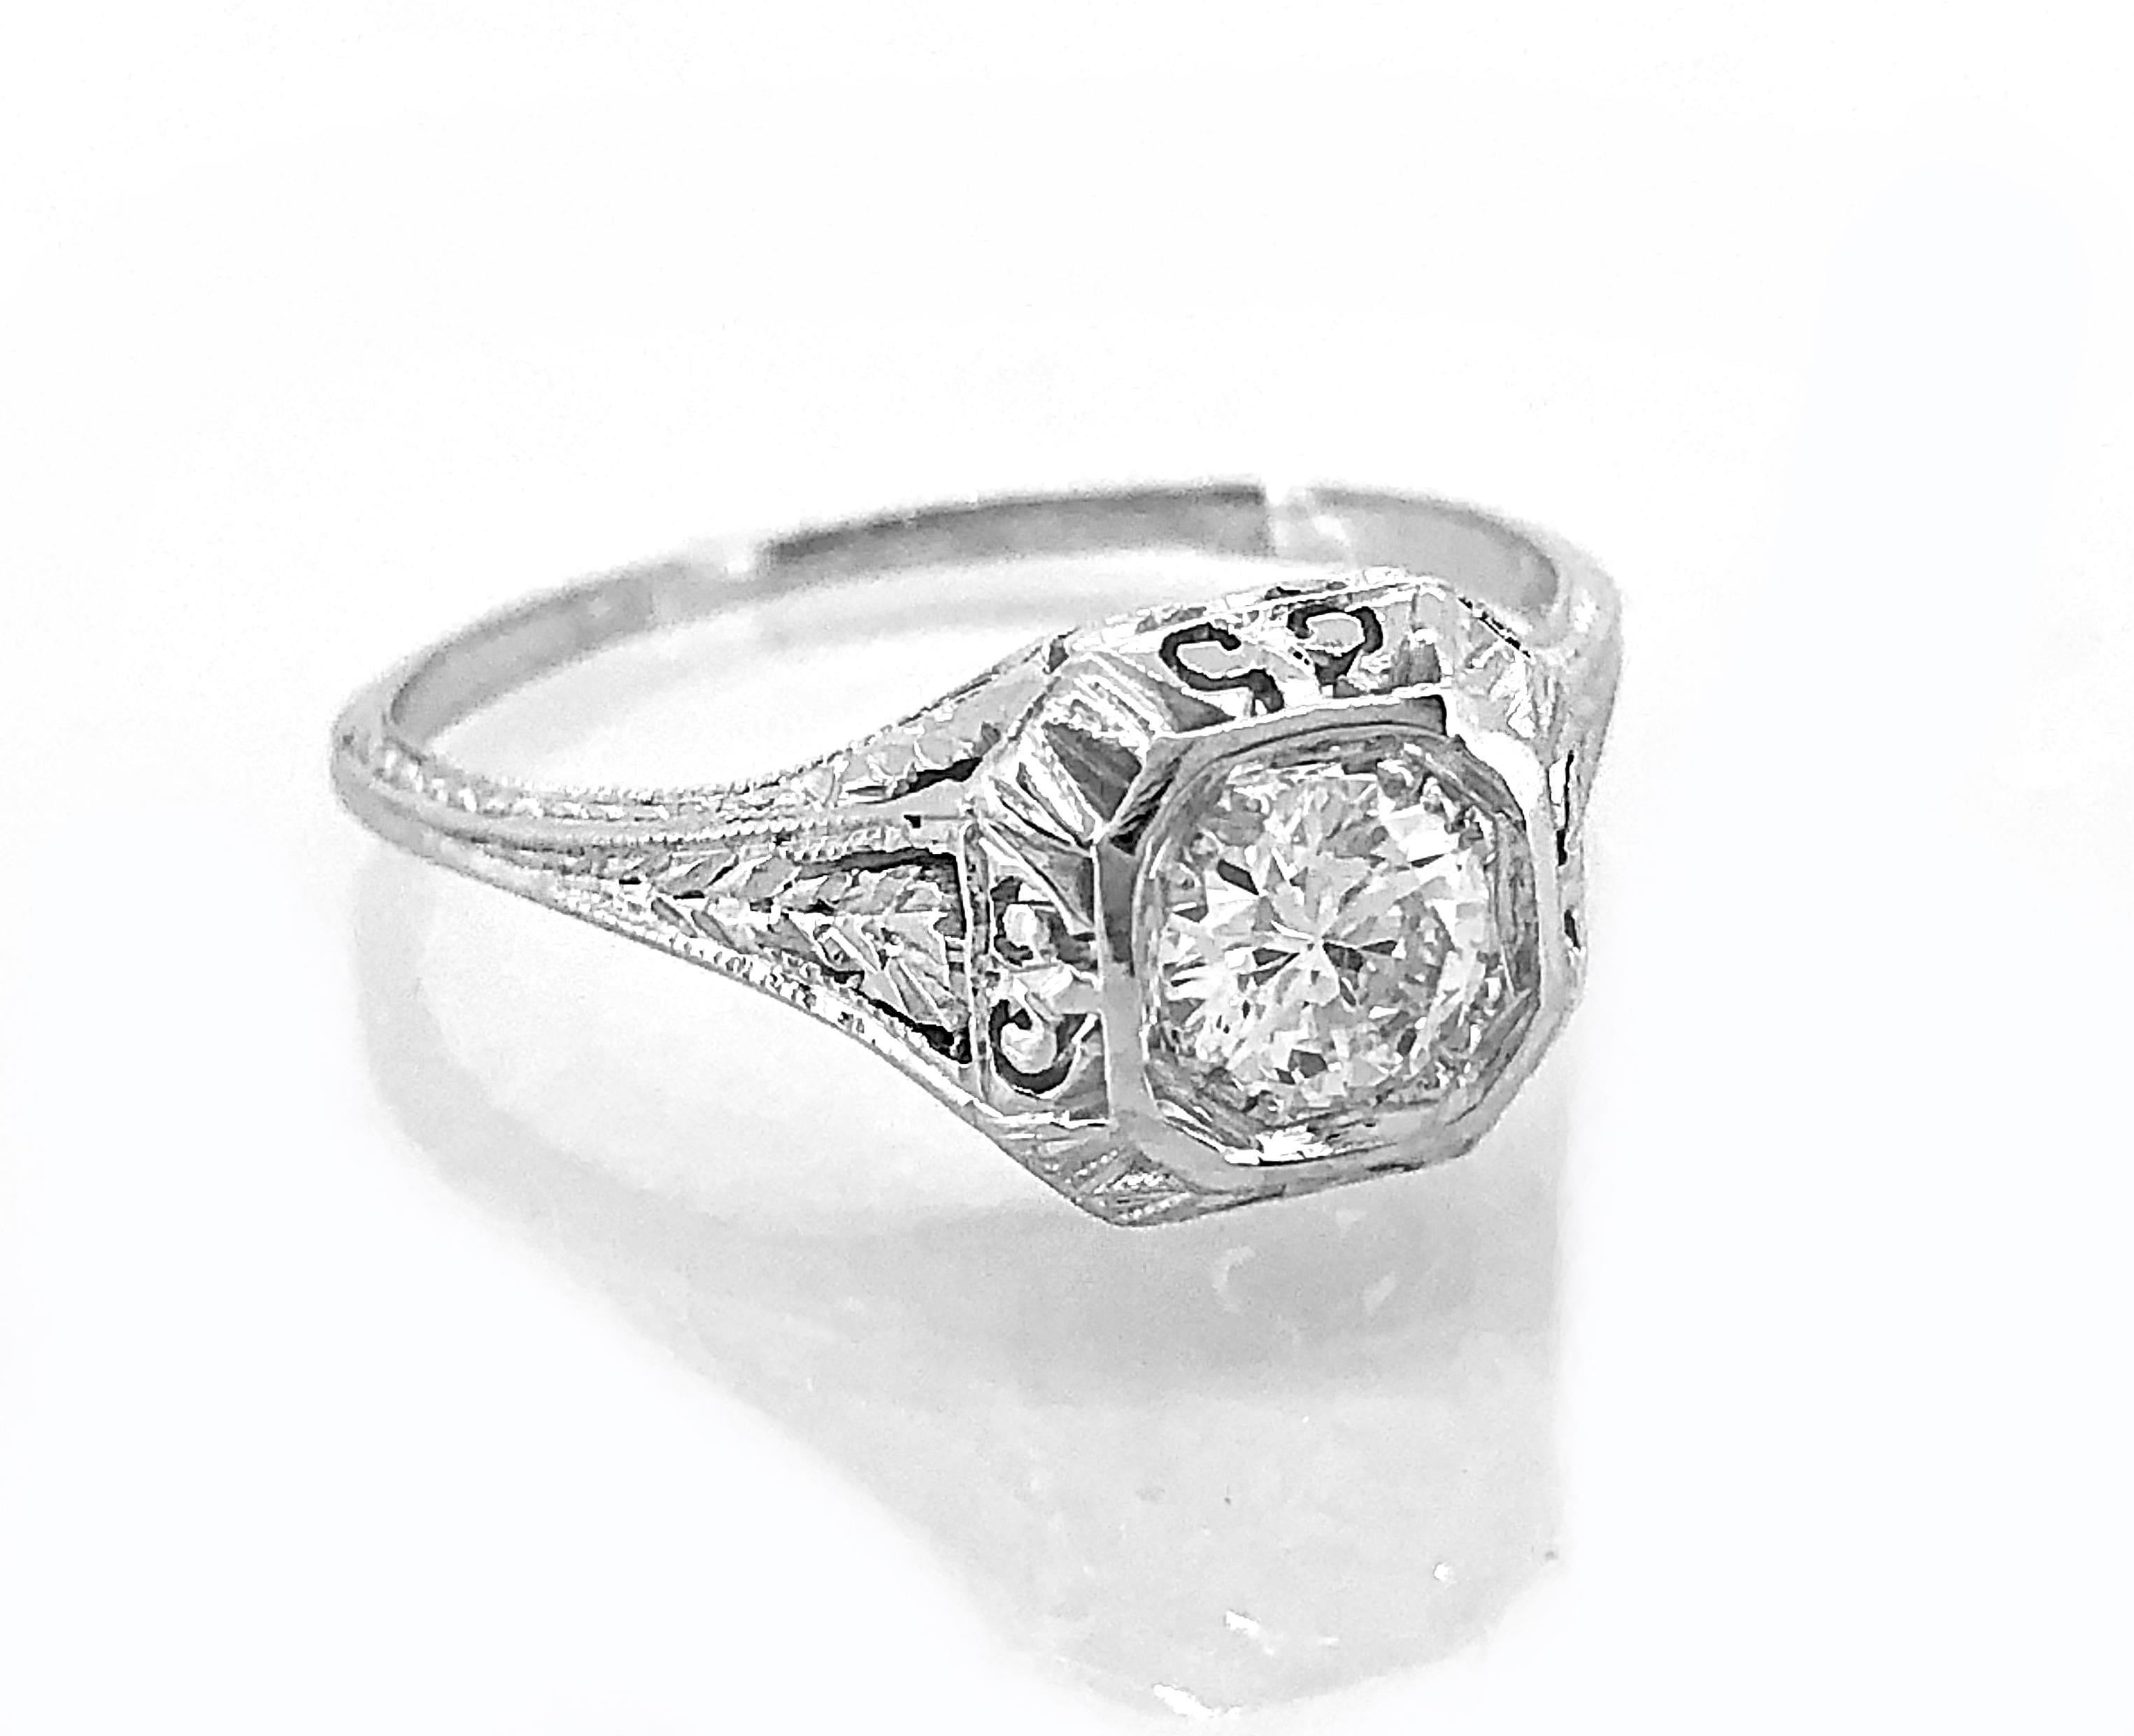 A highly filigreed antique engagement ring featuring a .53ct. apx. transitional cut center diamond. While this ring comes with an EGL cert stating it is an E-F color and VS2 clarity, we feel it is actually F-G color and SI1 clarity. This engagement